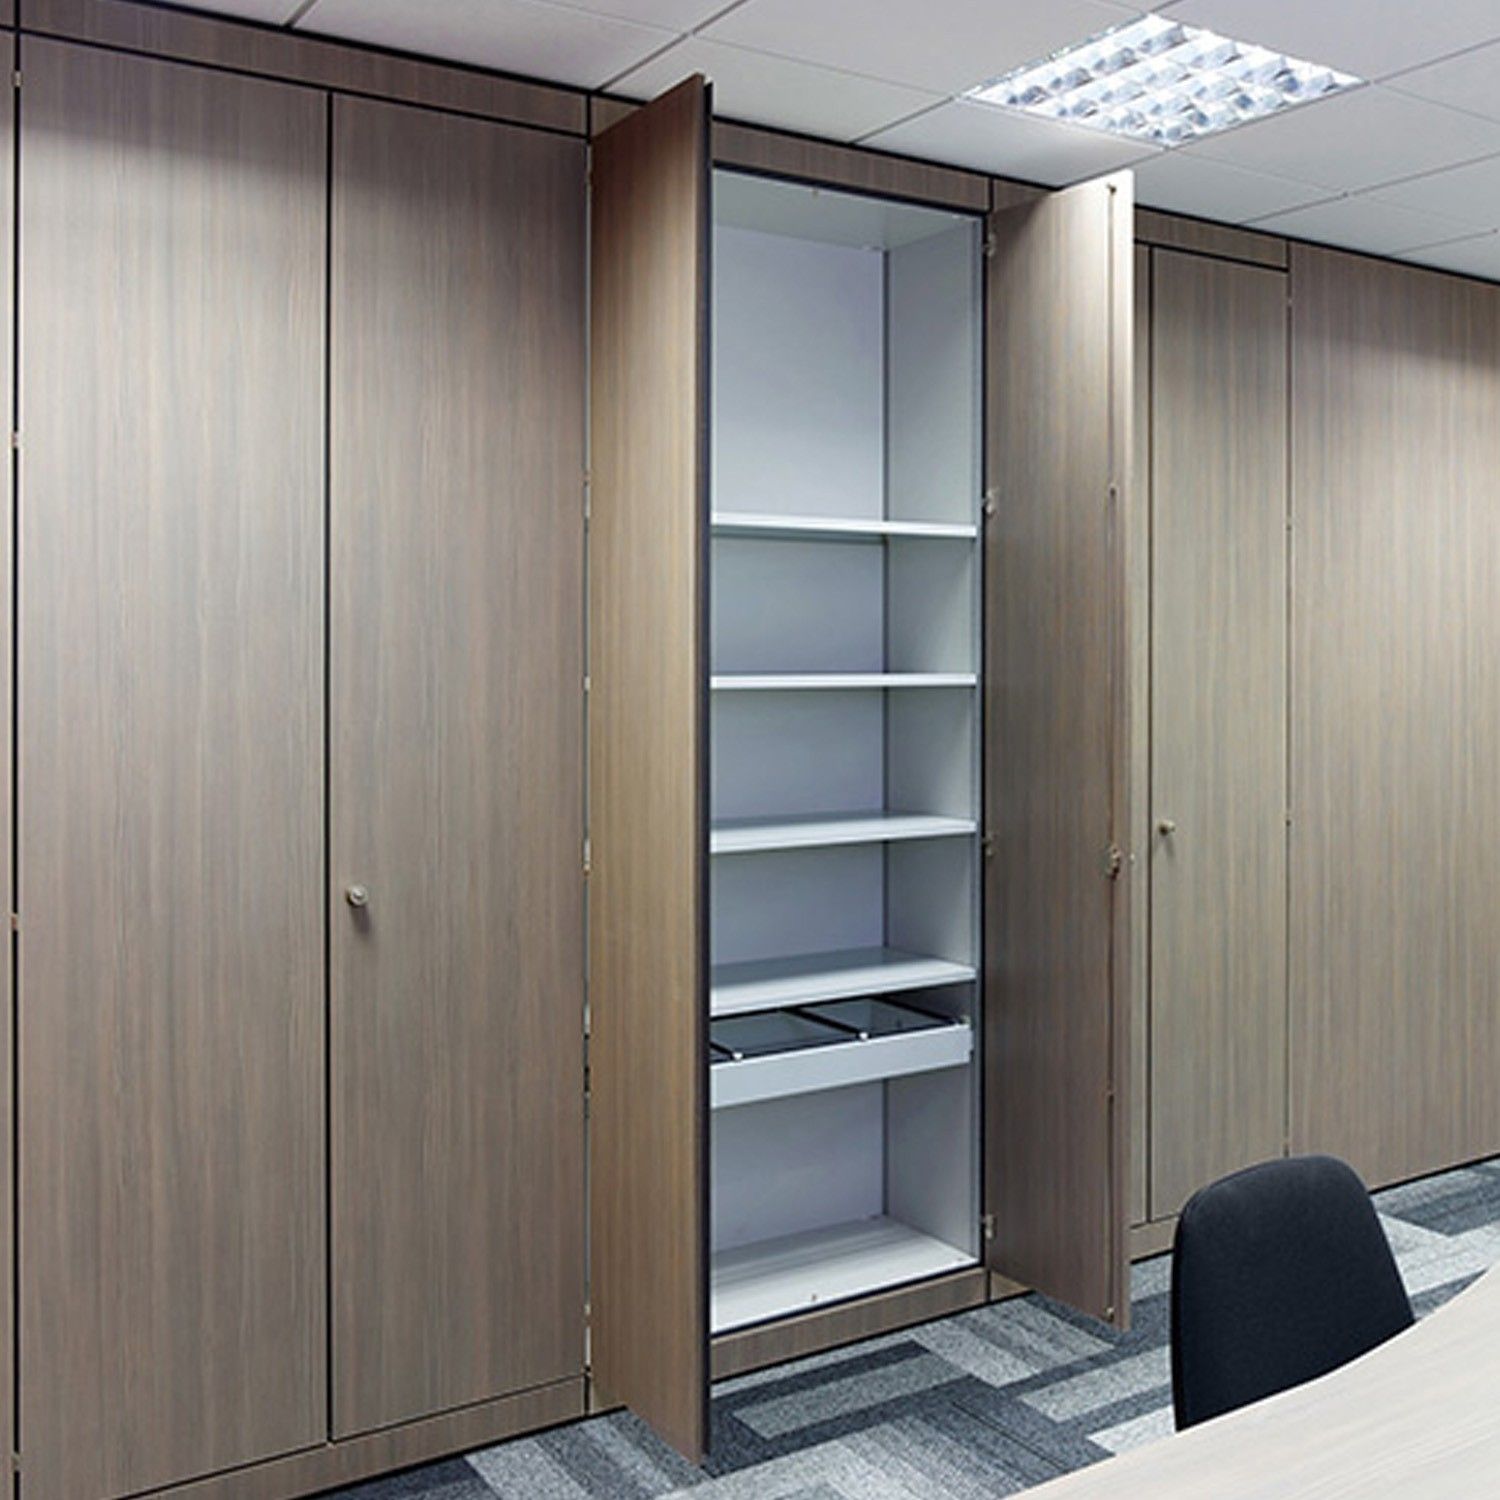 Office Storage Wall Office Cupboards Storage Apres Furniture Pertaining To Office Wall Cupboards (View 11 of 12)